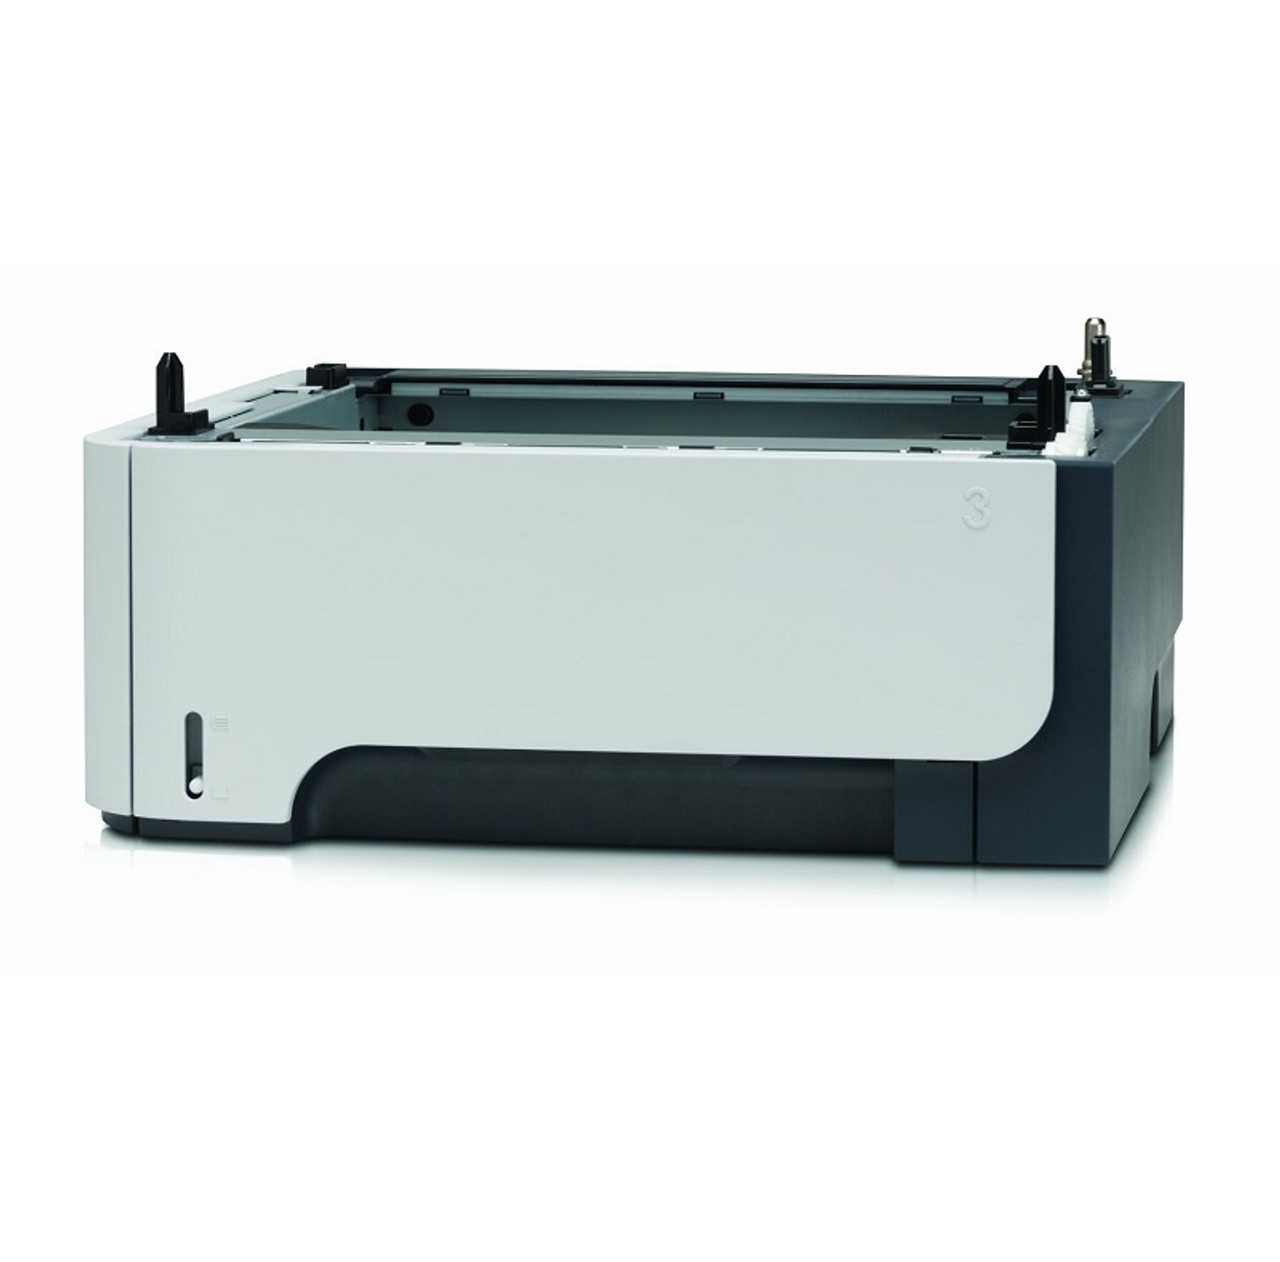 C4125AM - HP 500-Sheets Paper Feeder Tray Assembly for LaserJet 4000 / 4050 / 4100 Series Printer (Refurbished / Grade-A)